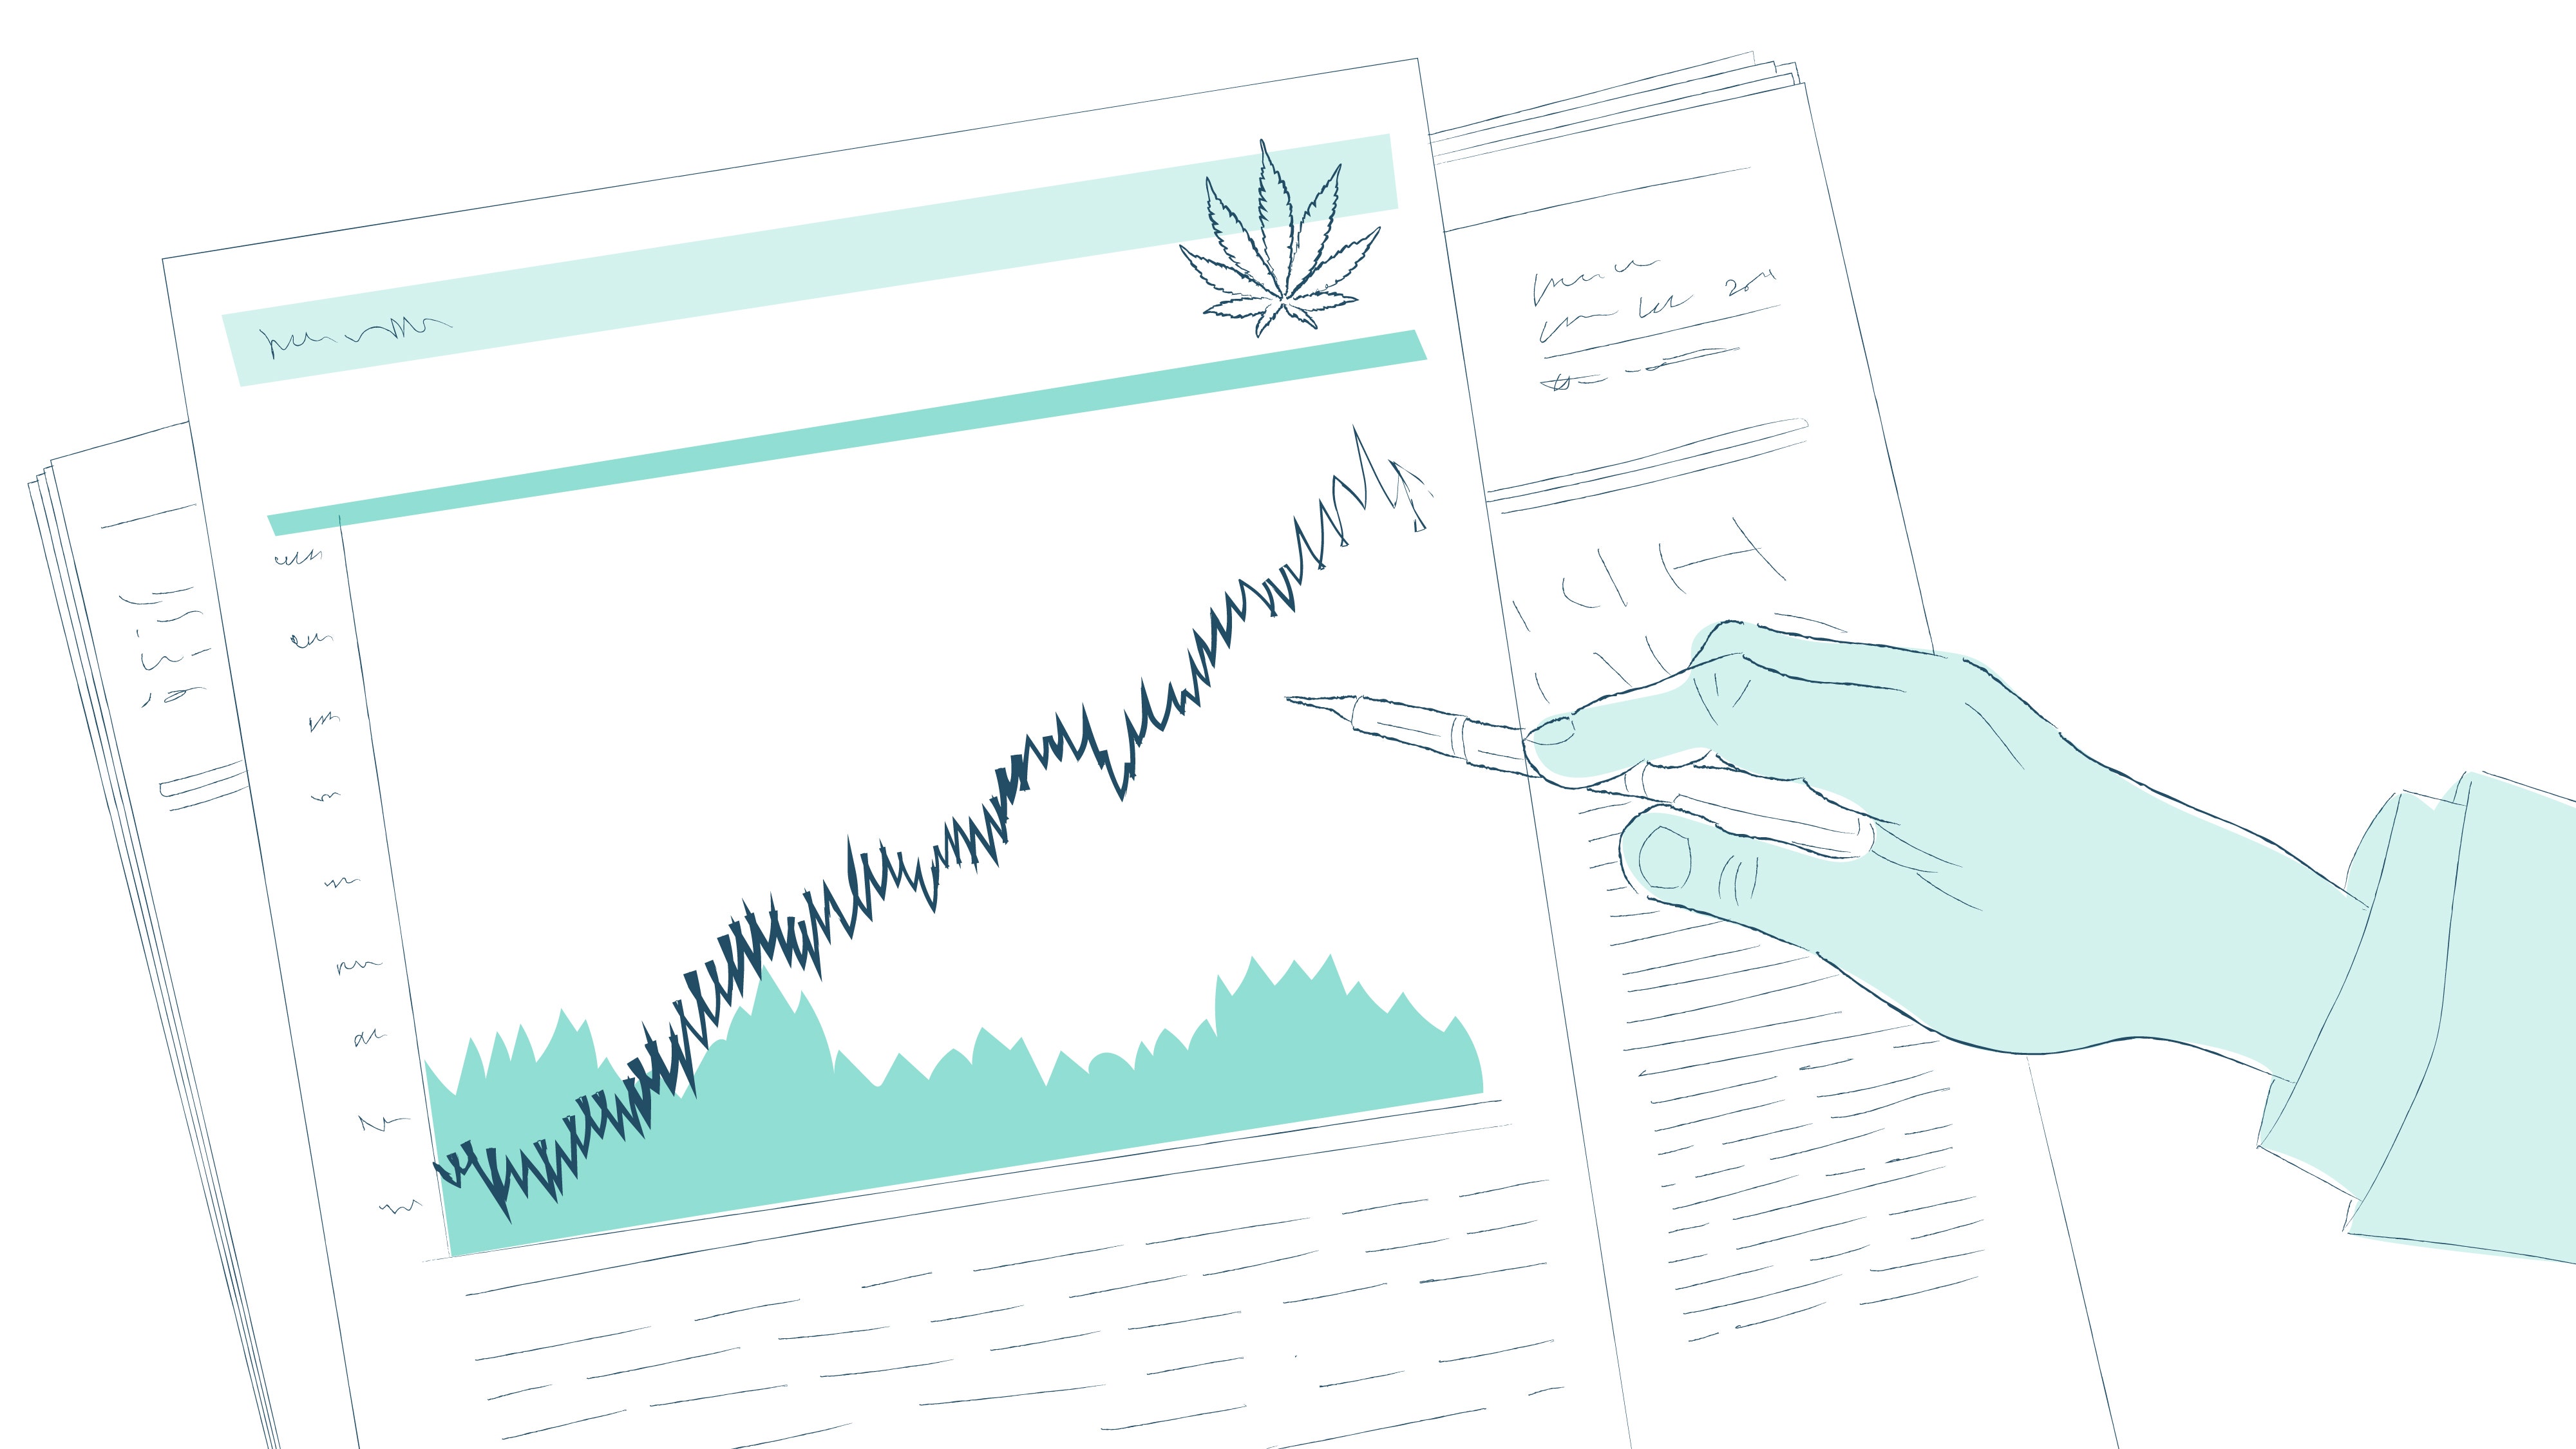 Urban-gro, The Flowr, Hexo & KushCo Among Top Cannabis Movers For August 4, 2021